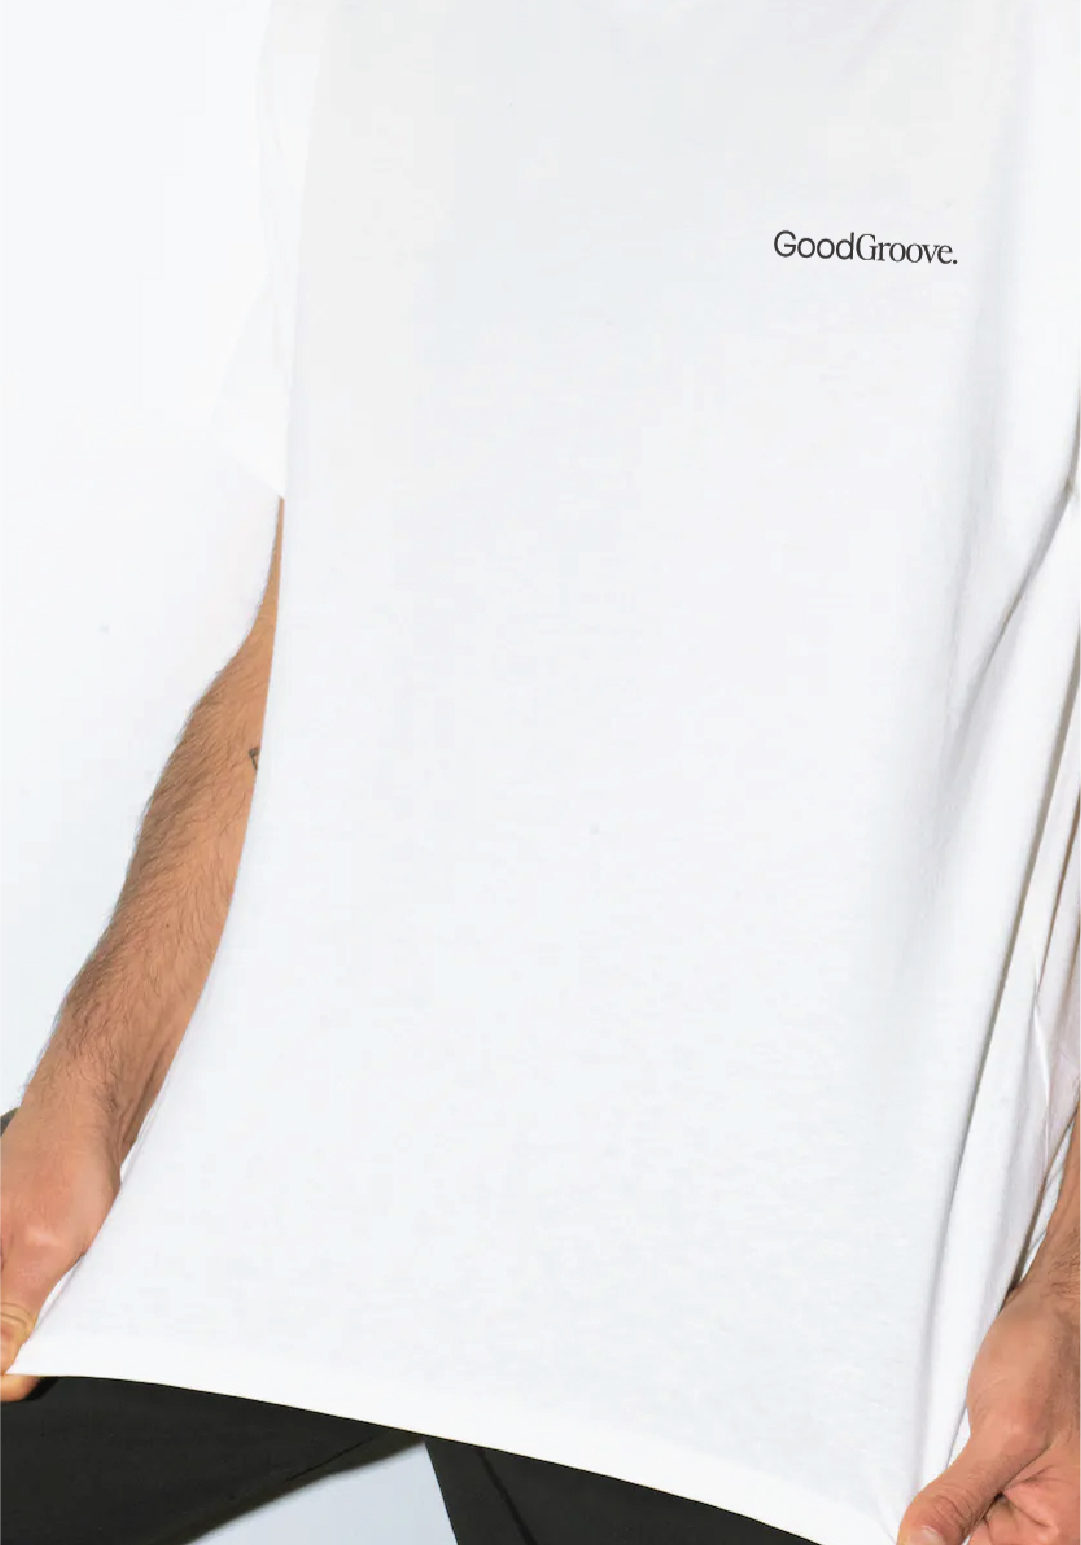 Tshirt with Good Groove logo on top